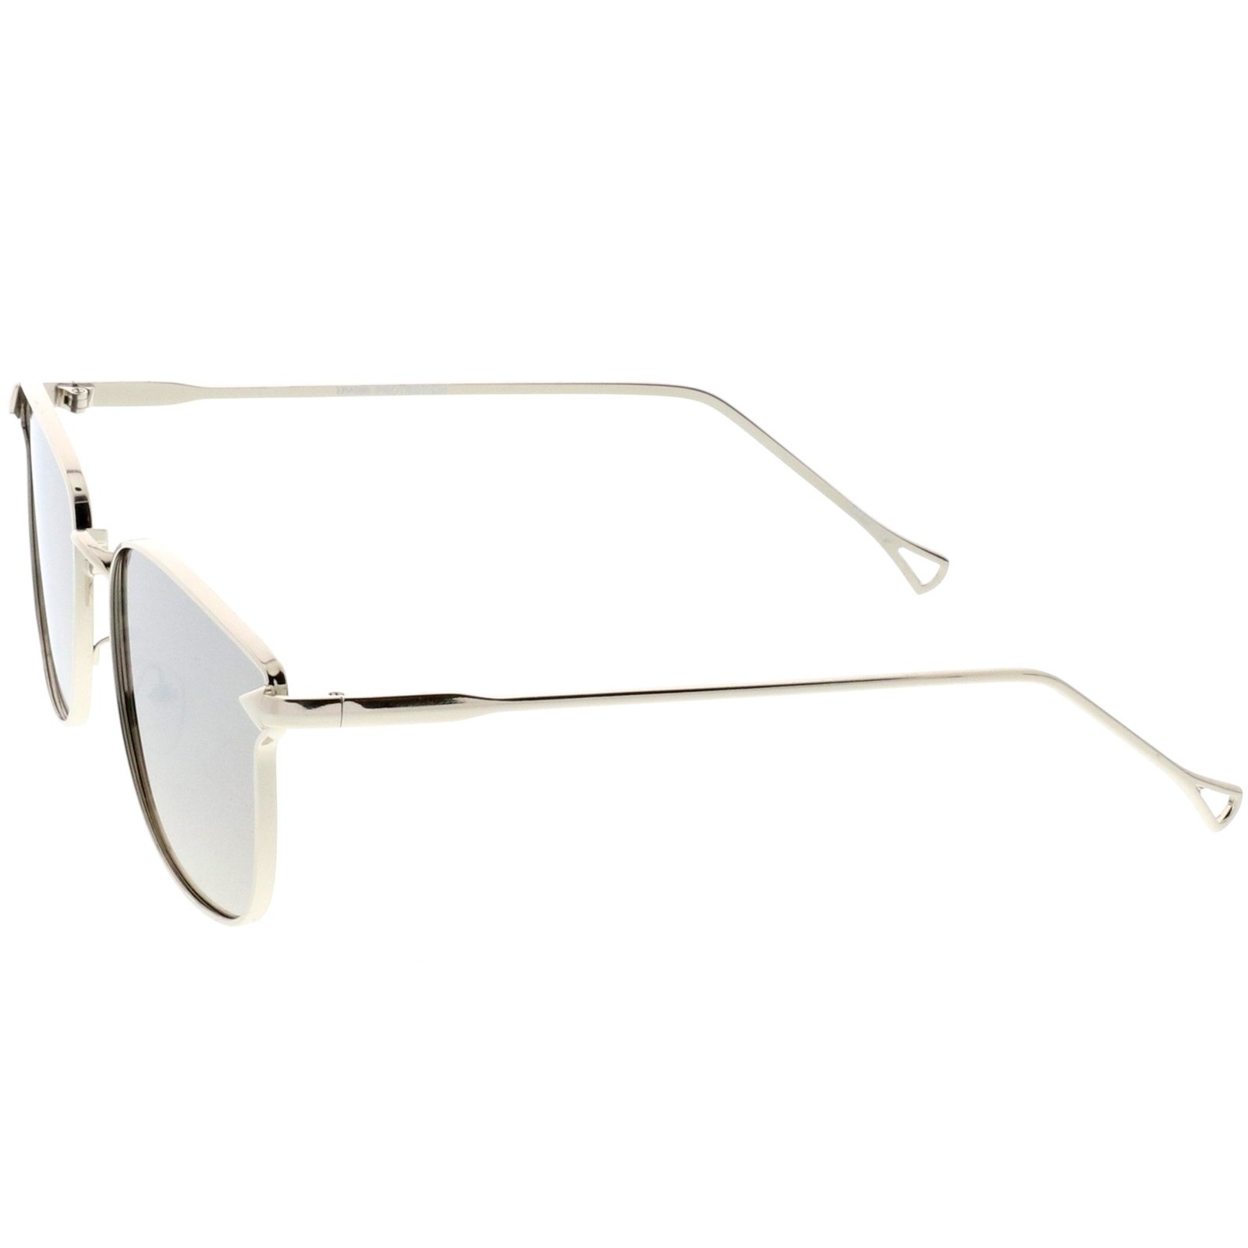 Modern Metal Square Sunglasses With Mirrored Flat Lenses And Slim Hook Arms 55mm - Gold / Gold Mirror